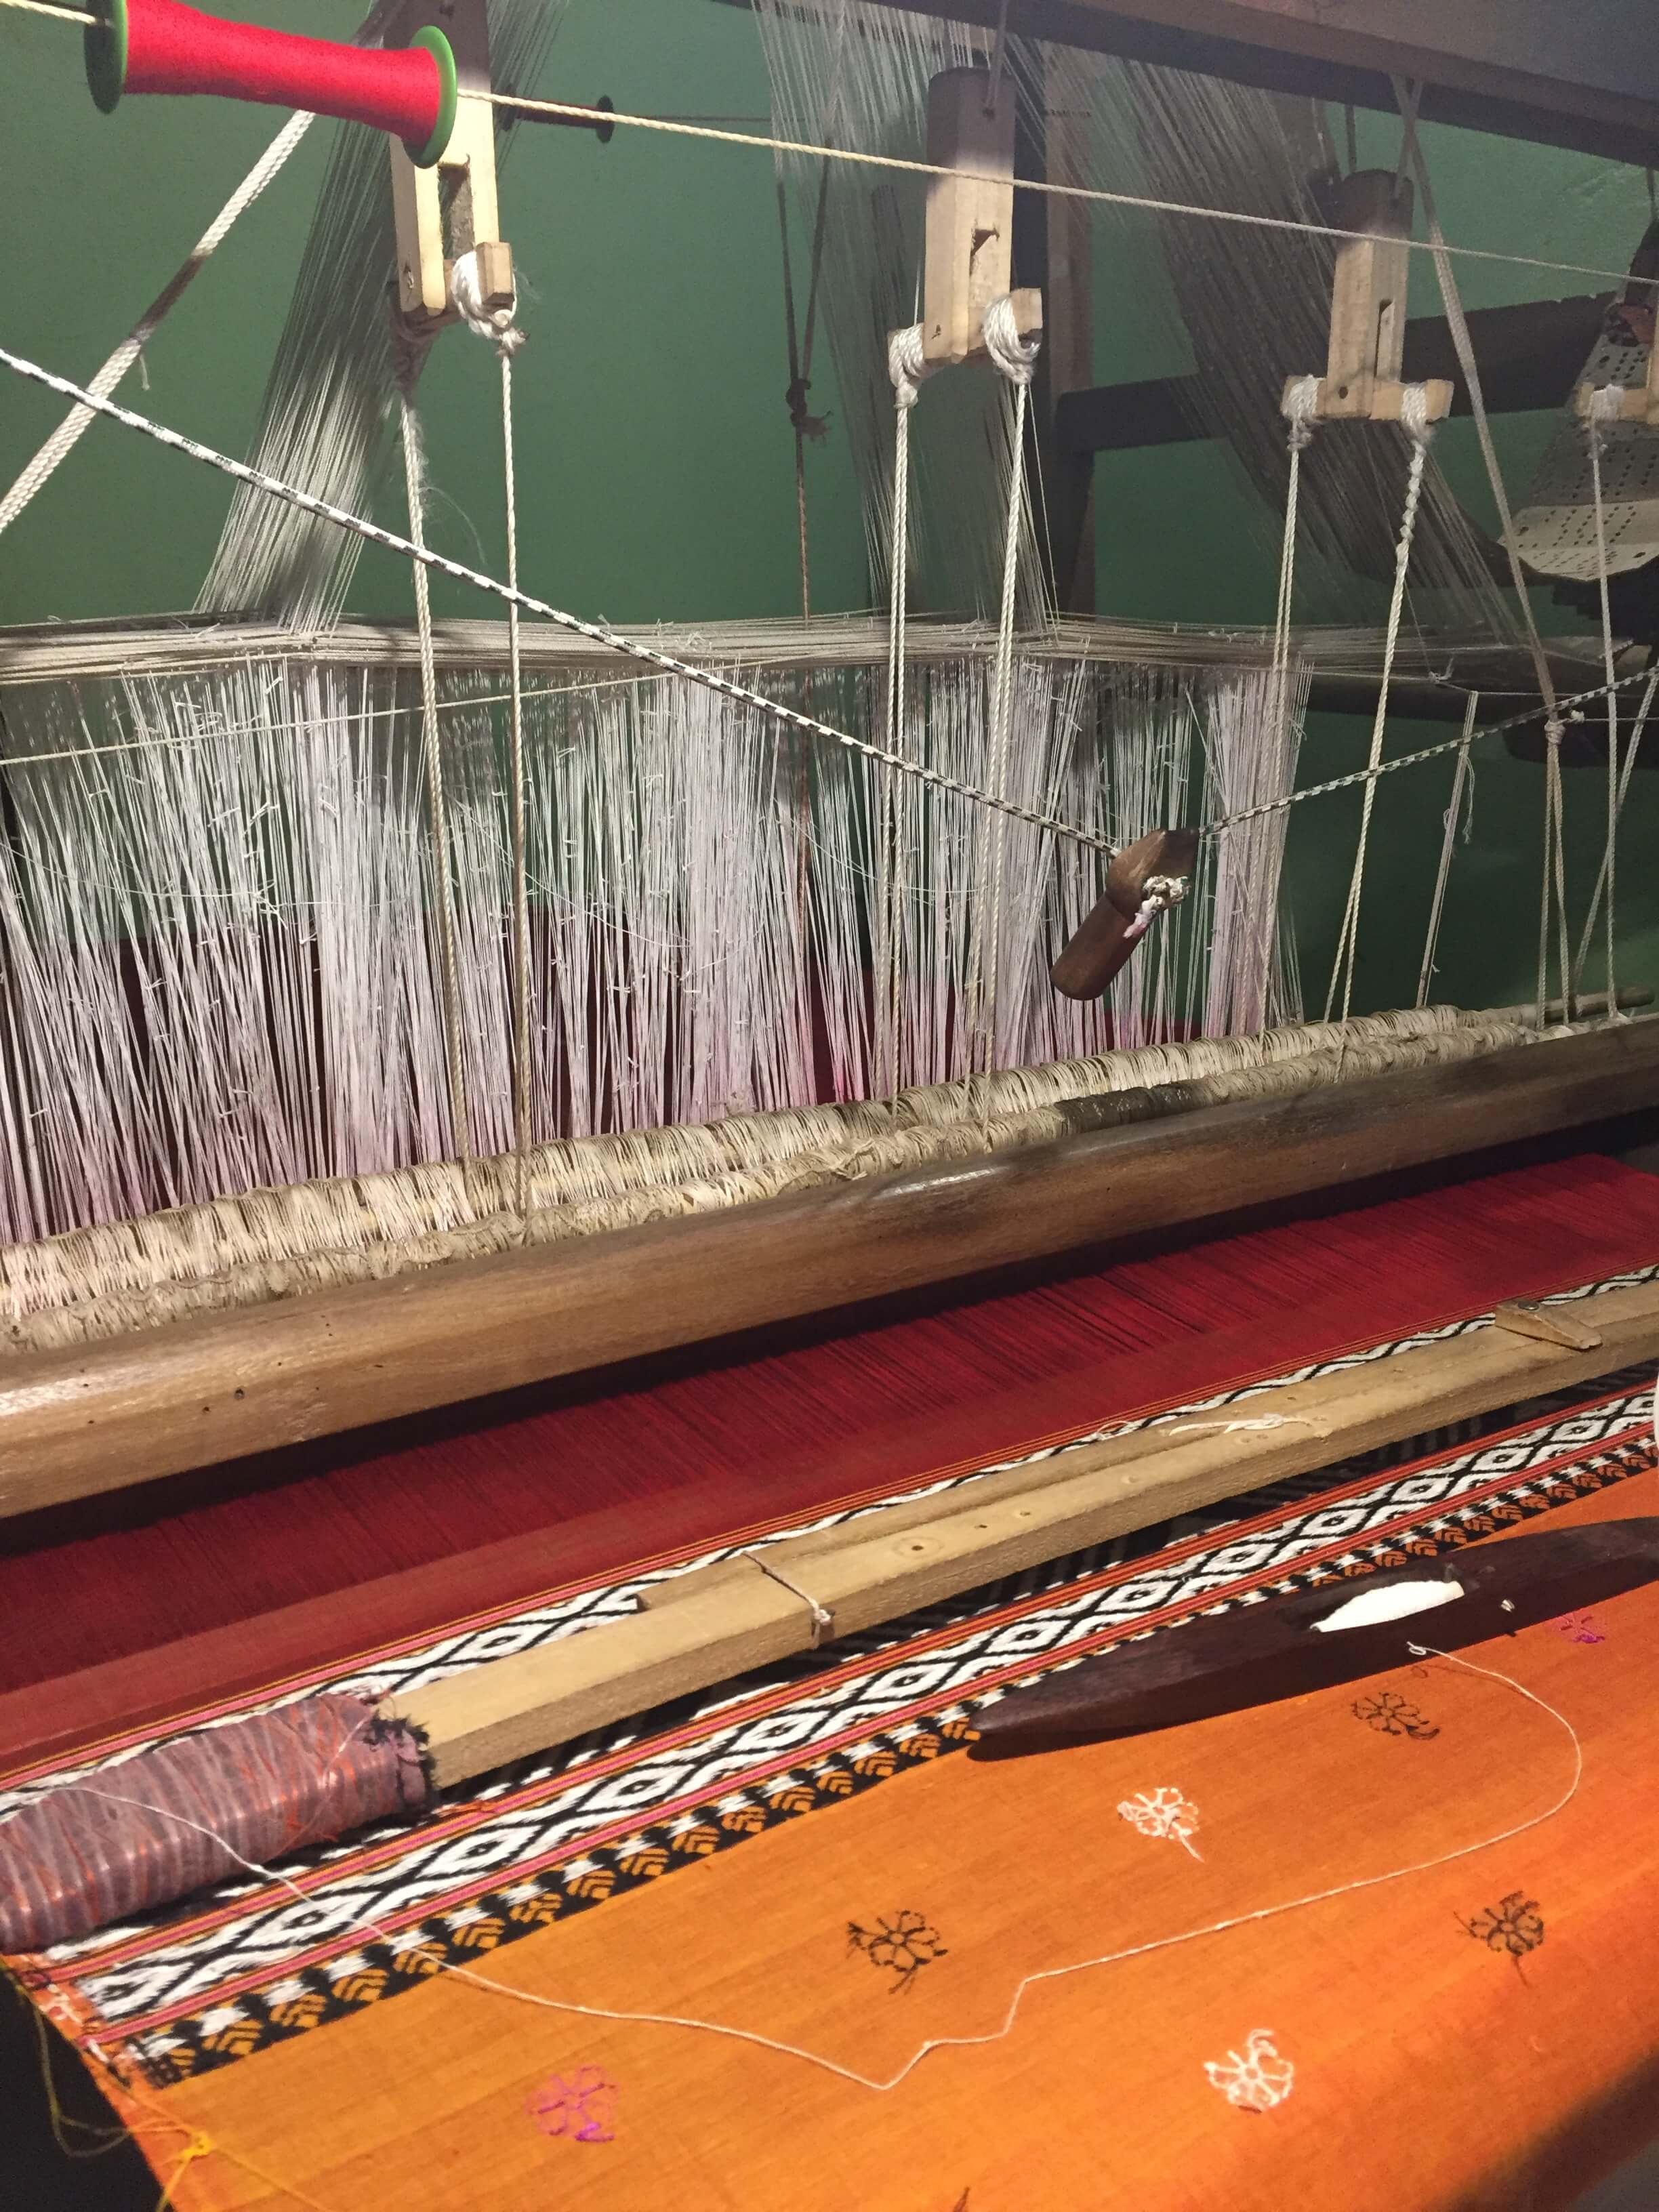 Image of a loom with woven fabric